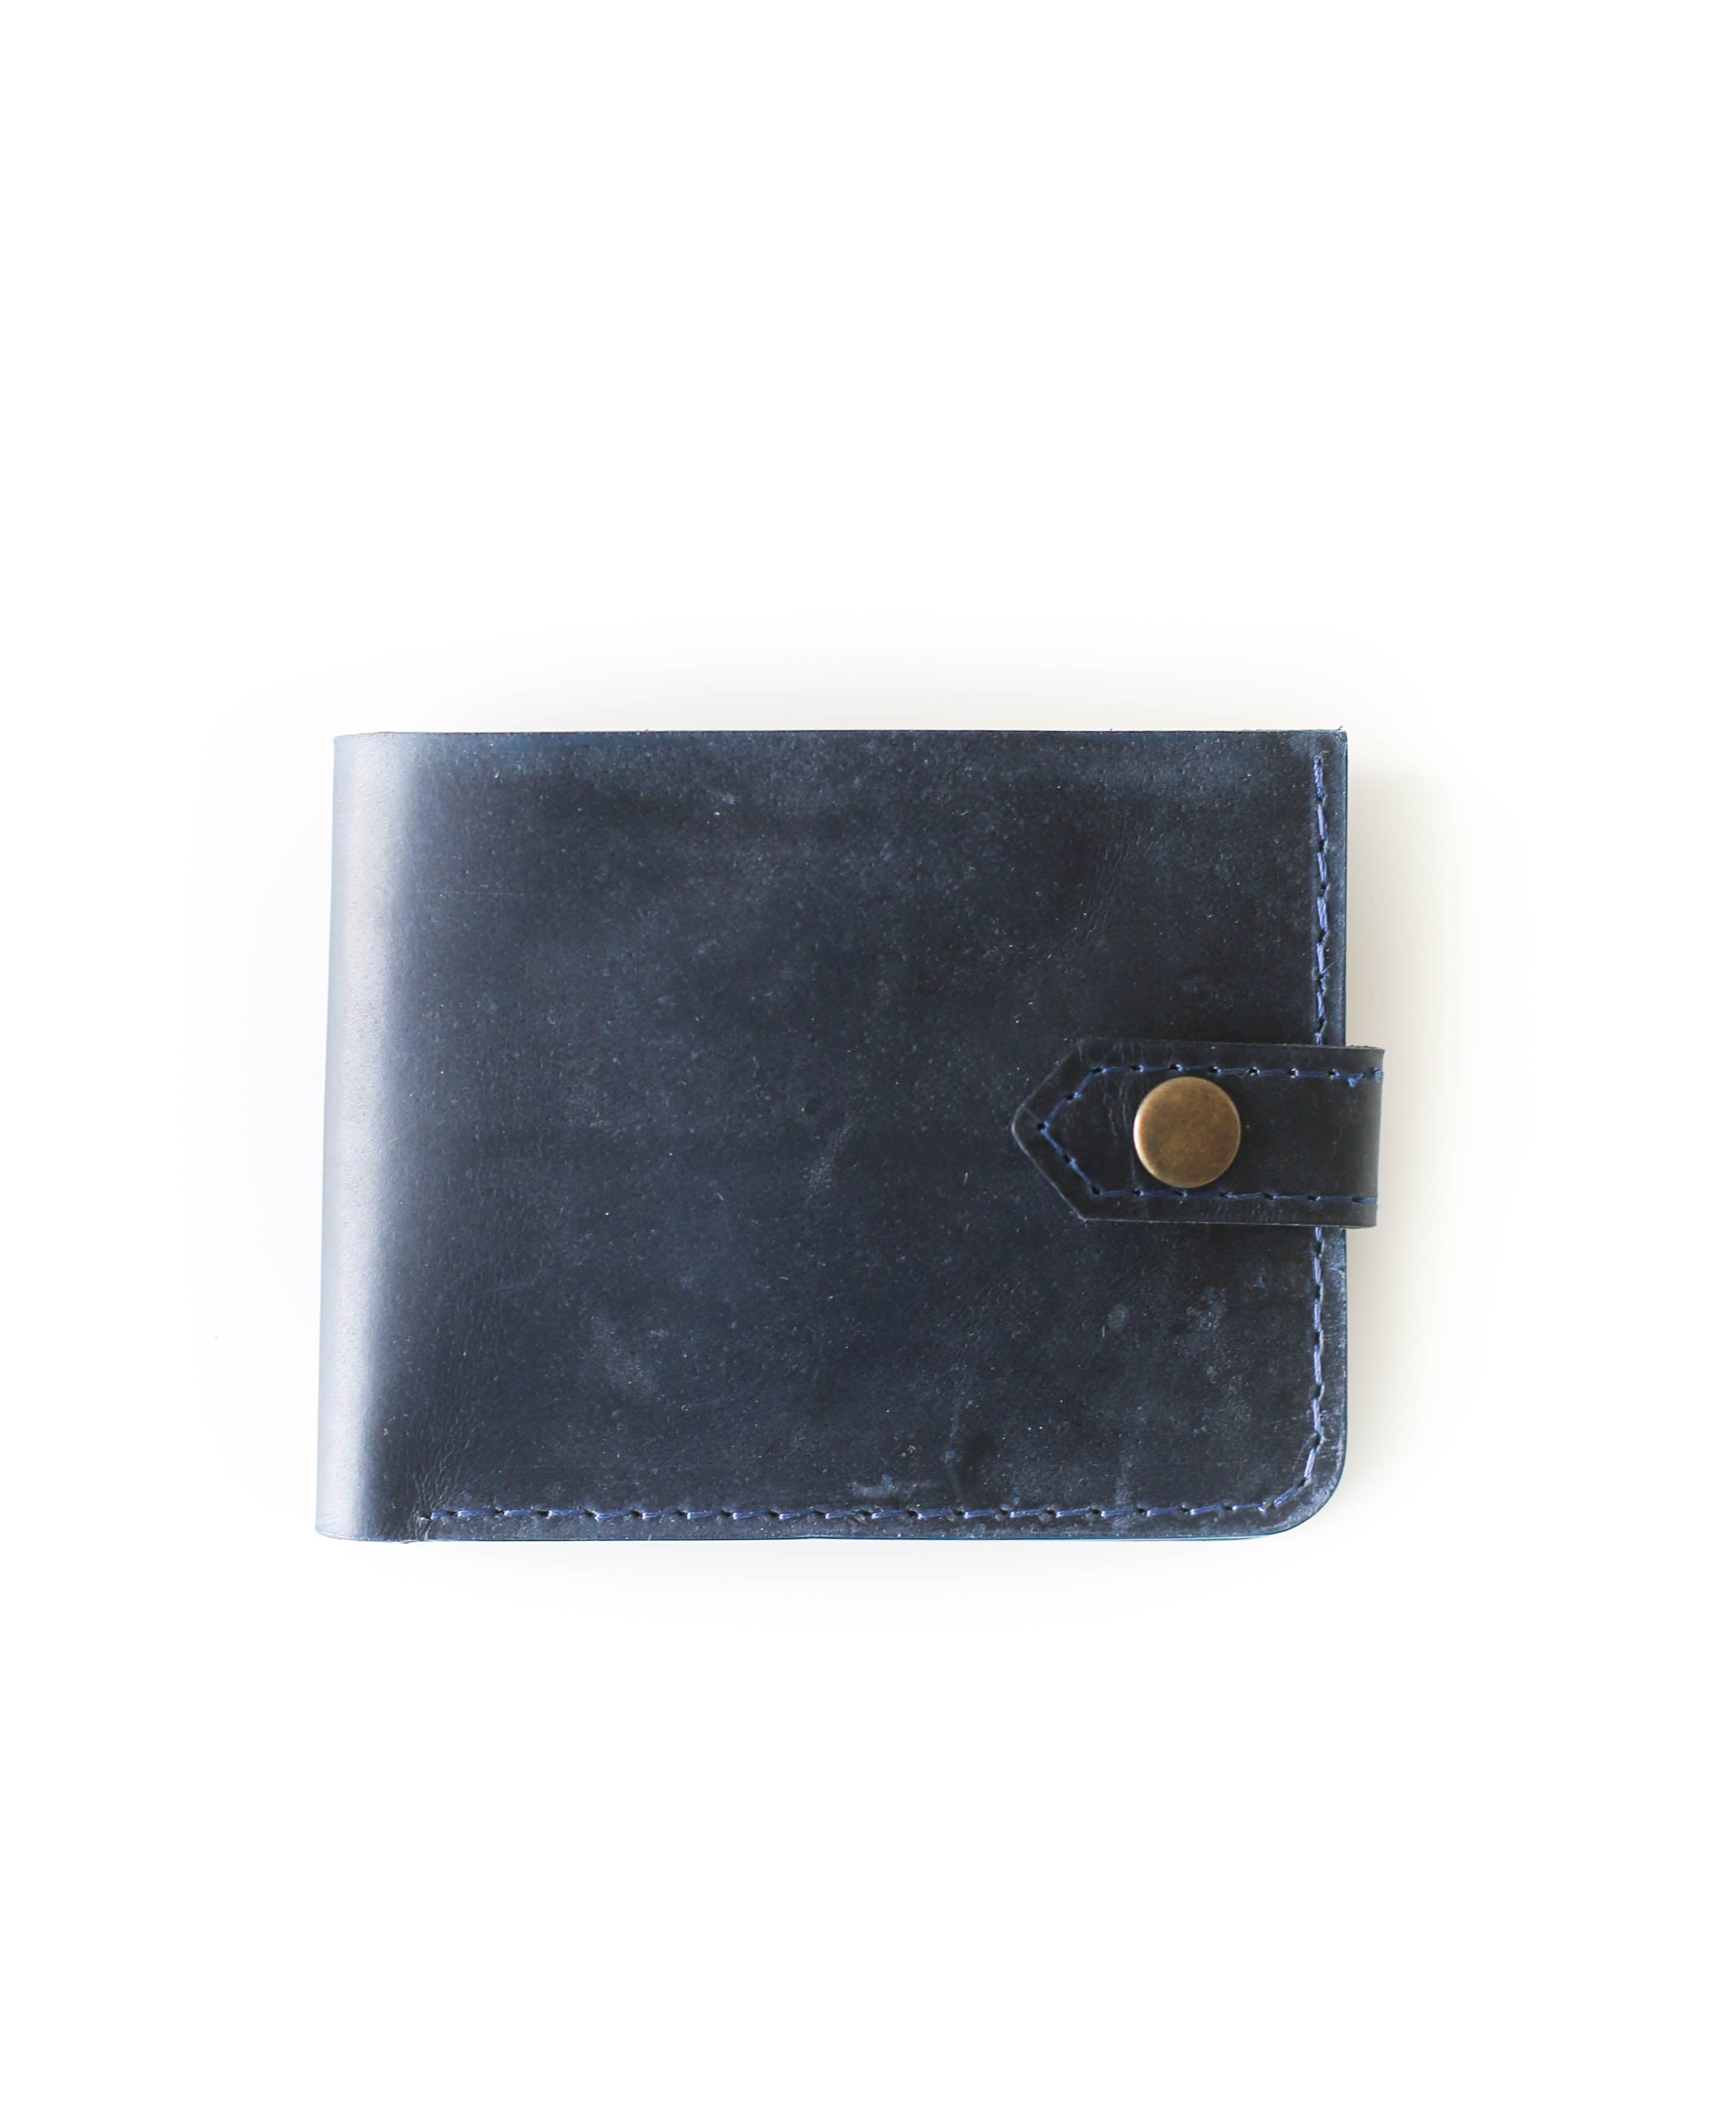 Handmade Leather Wallet | Leather Bifold Wallet